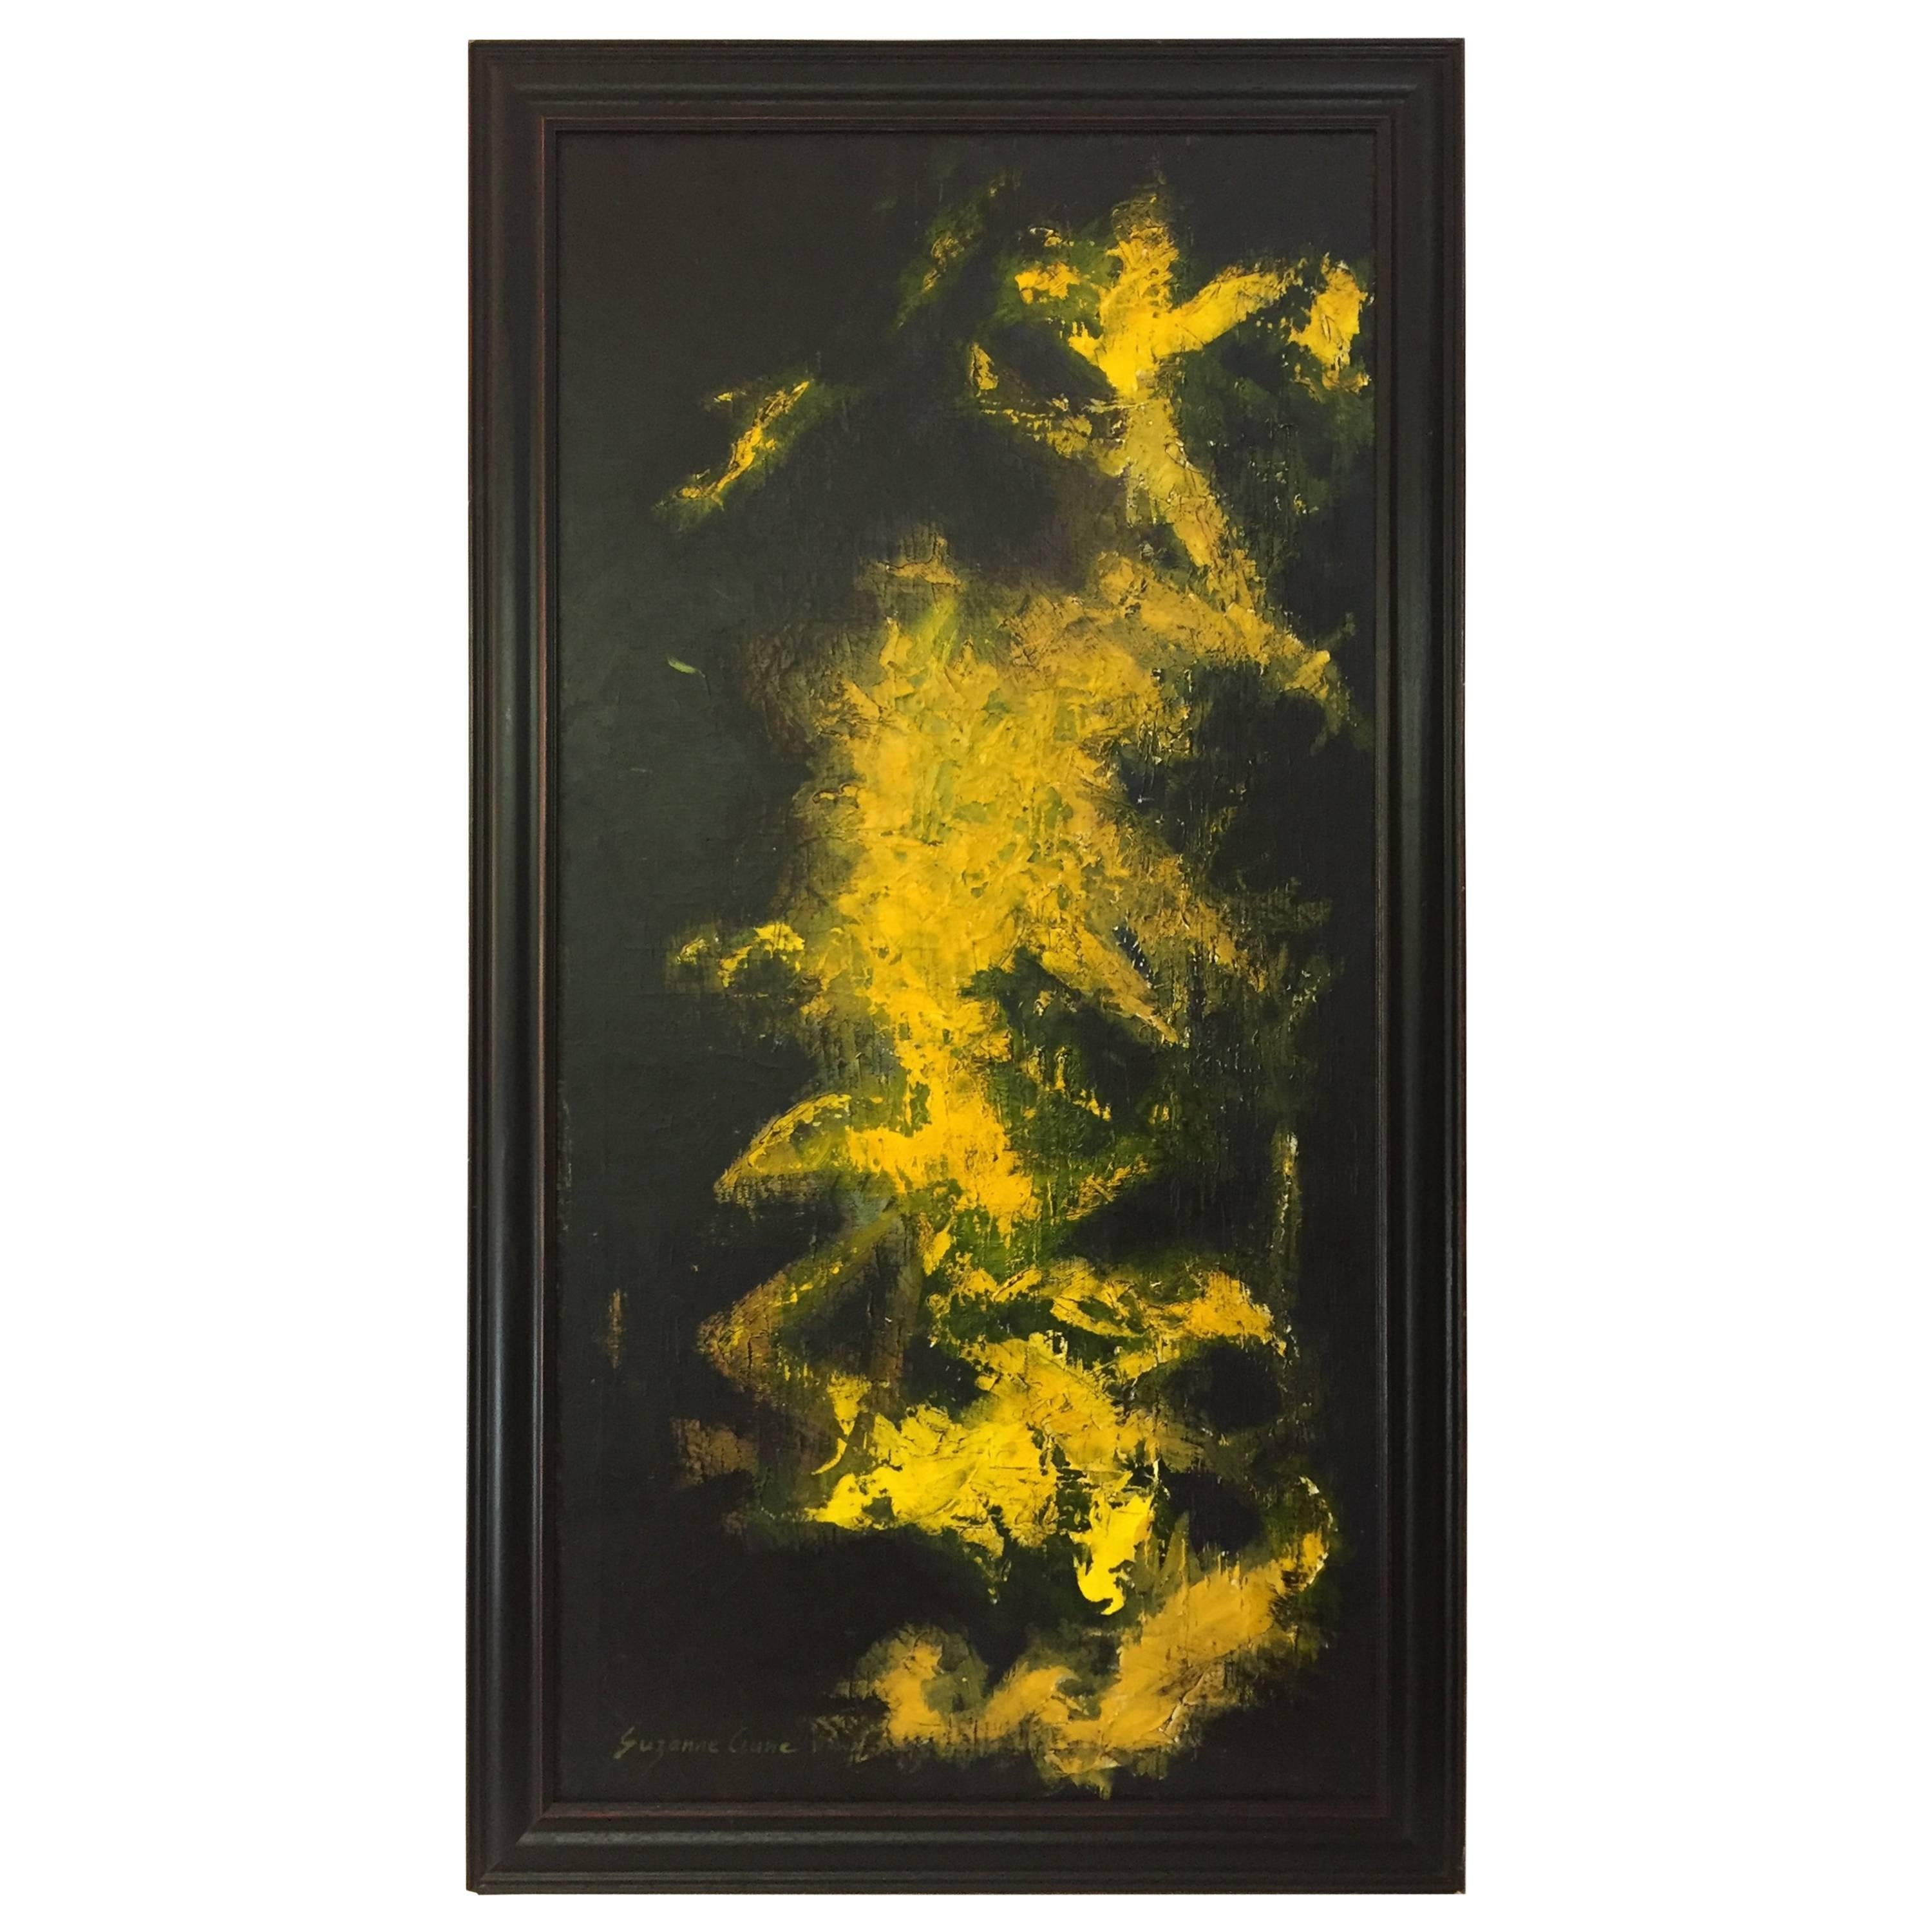 Black and Yellow Abstract Expressionist Painting by Suzanne Clune